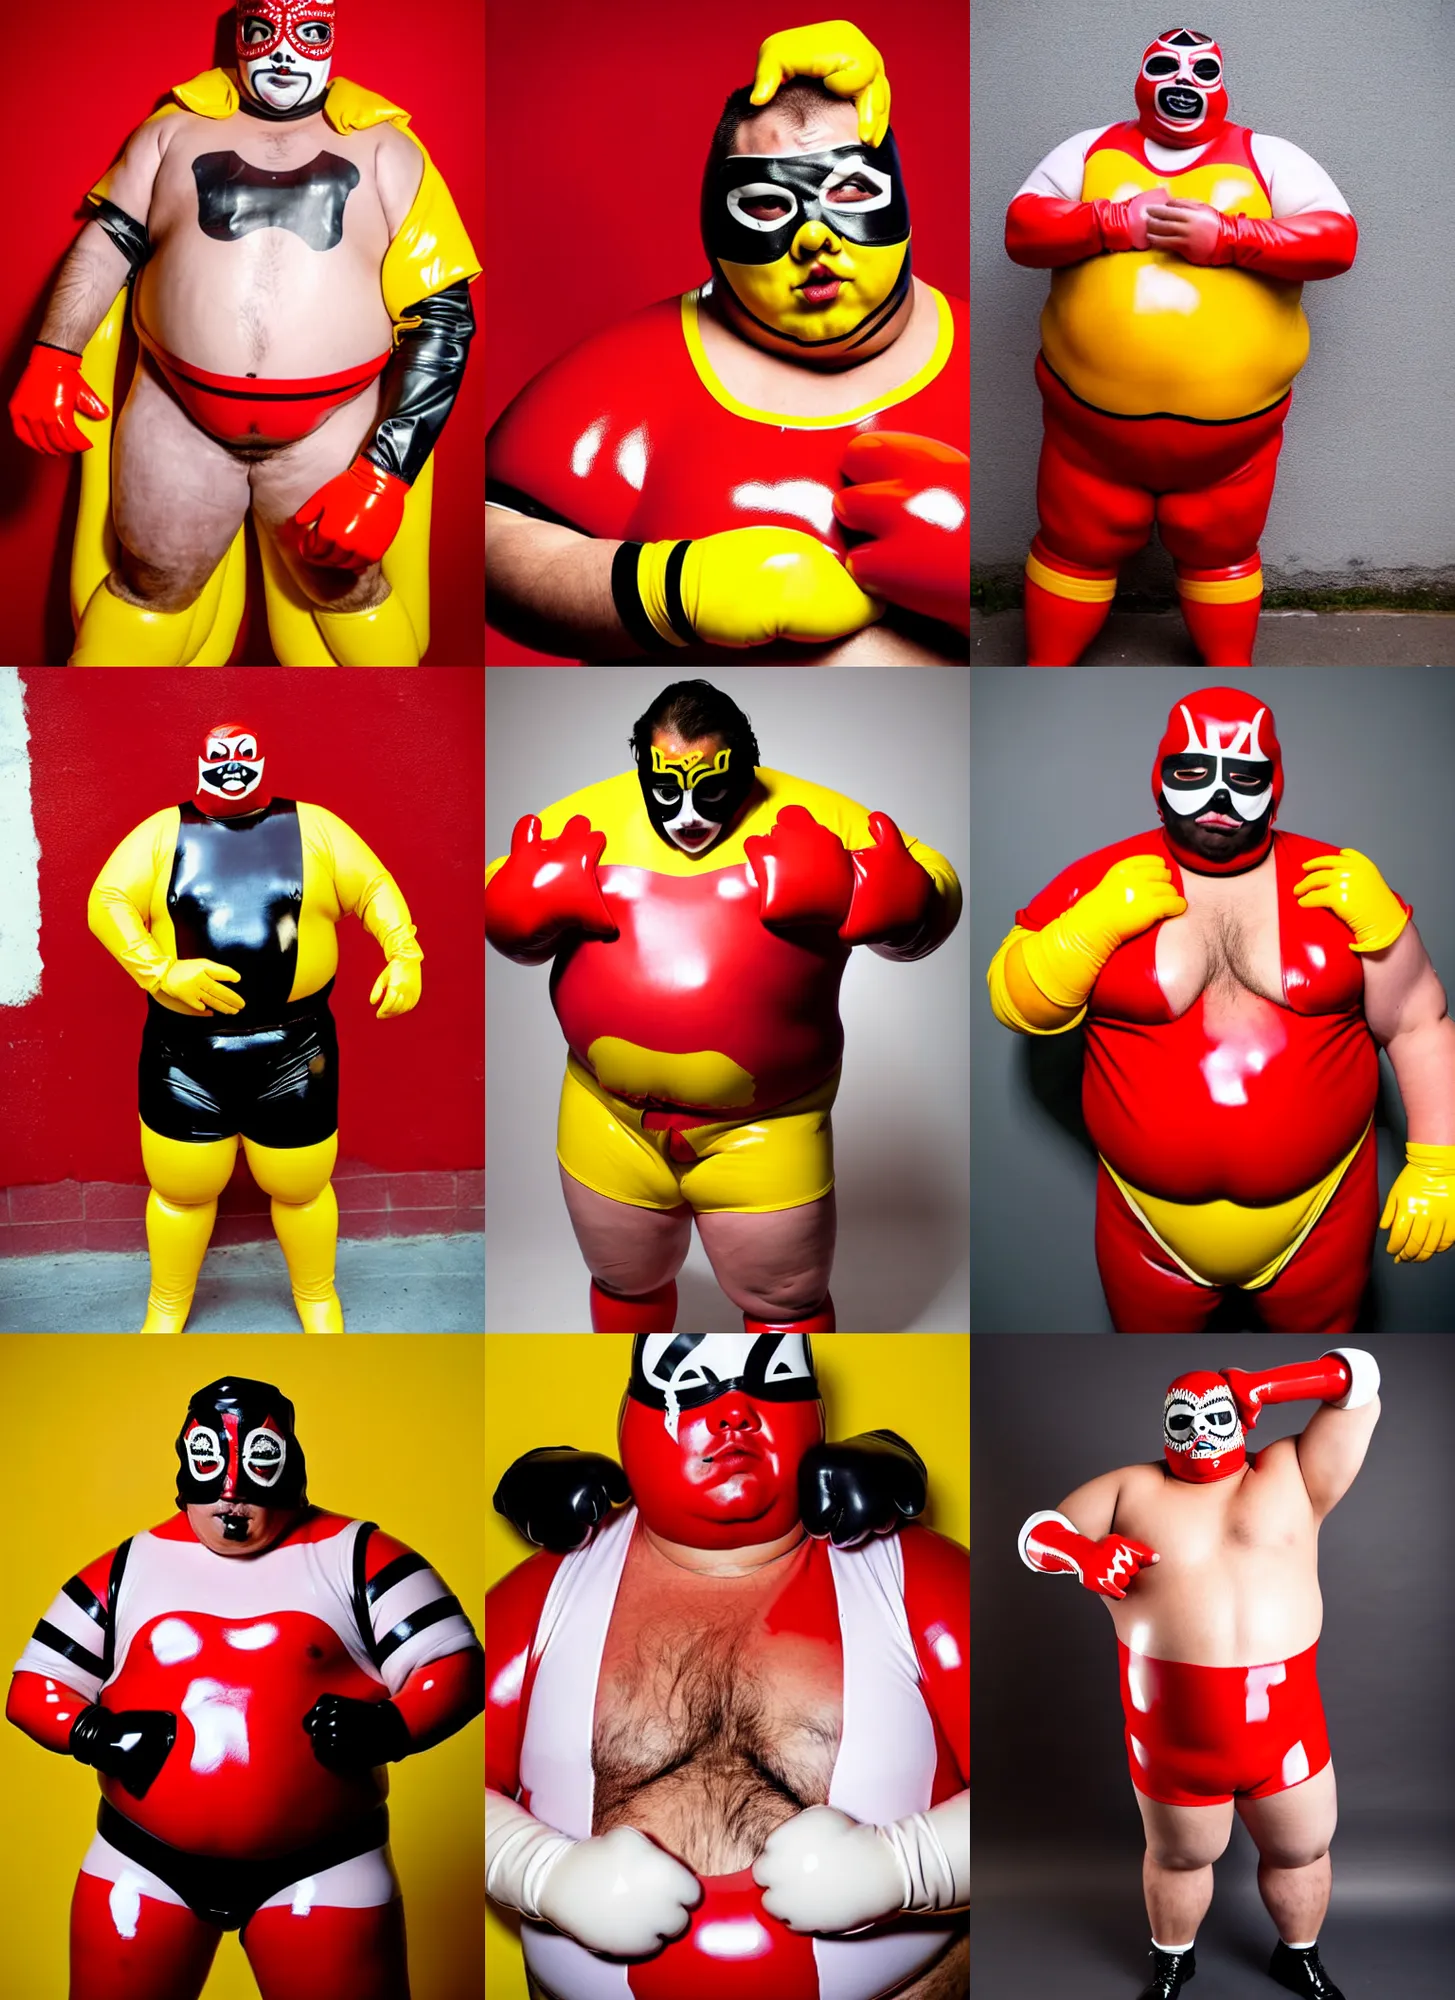 Prompt: portrait of a very chubby looking Lucha libre dressed in rubber latex costume with a big M tattoo on his bare hairy chest, red and white color latex sleeves, yellow latex gloves, red Ronald McDonald hair